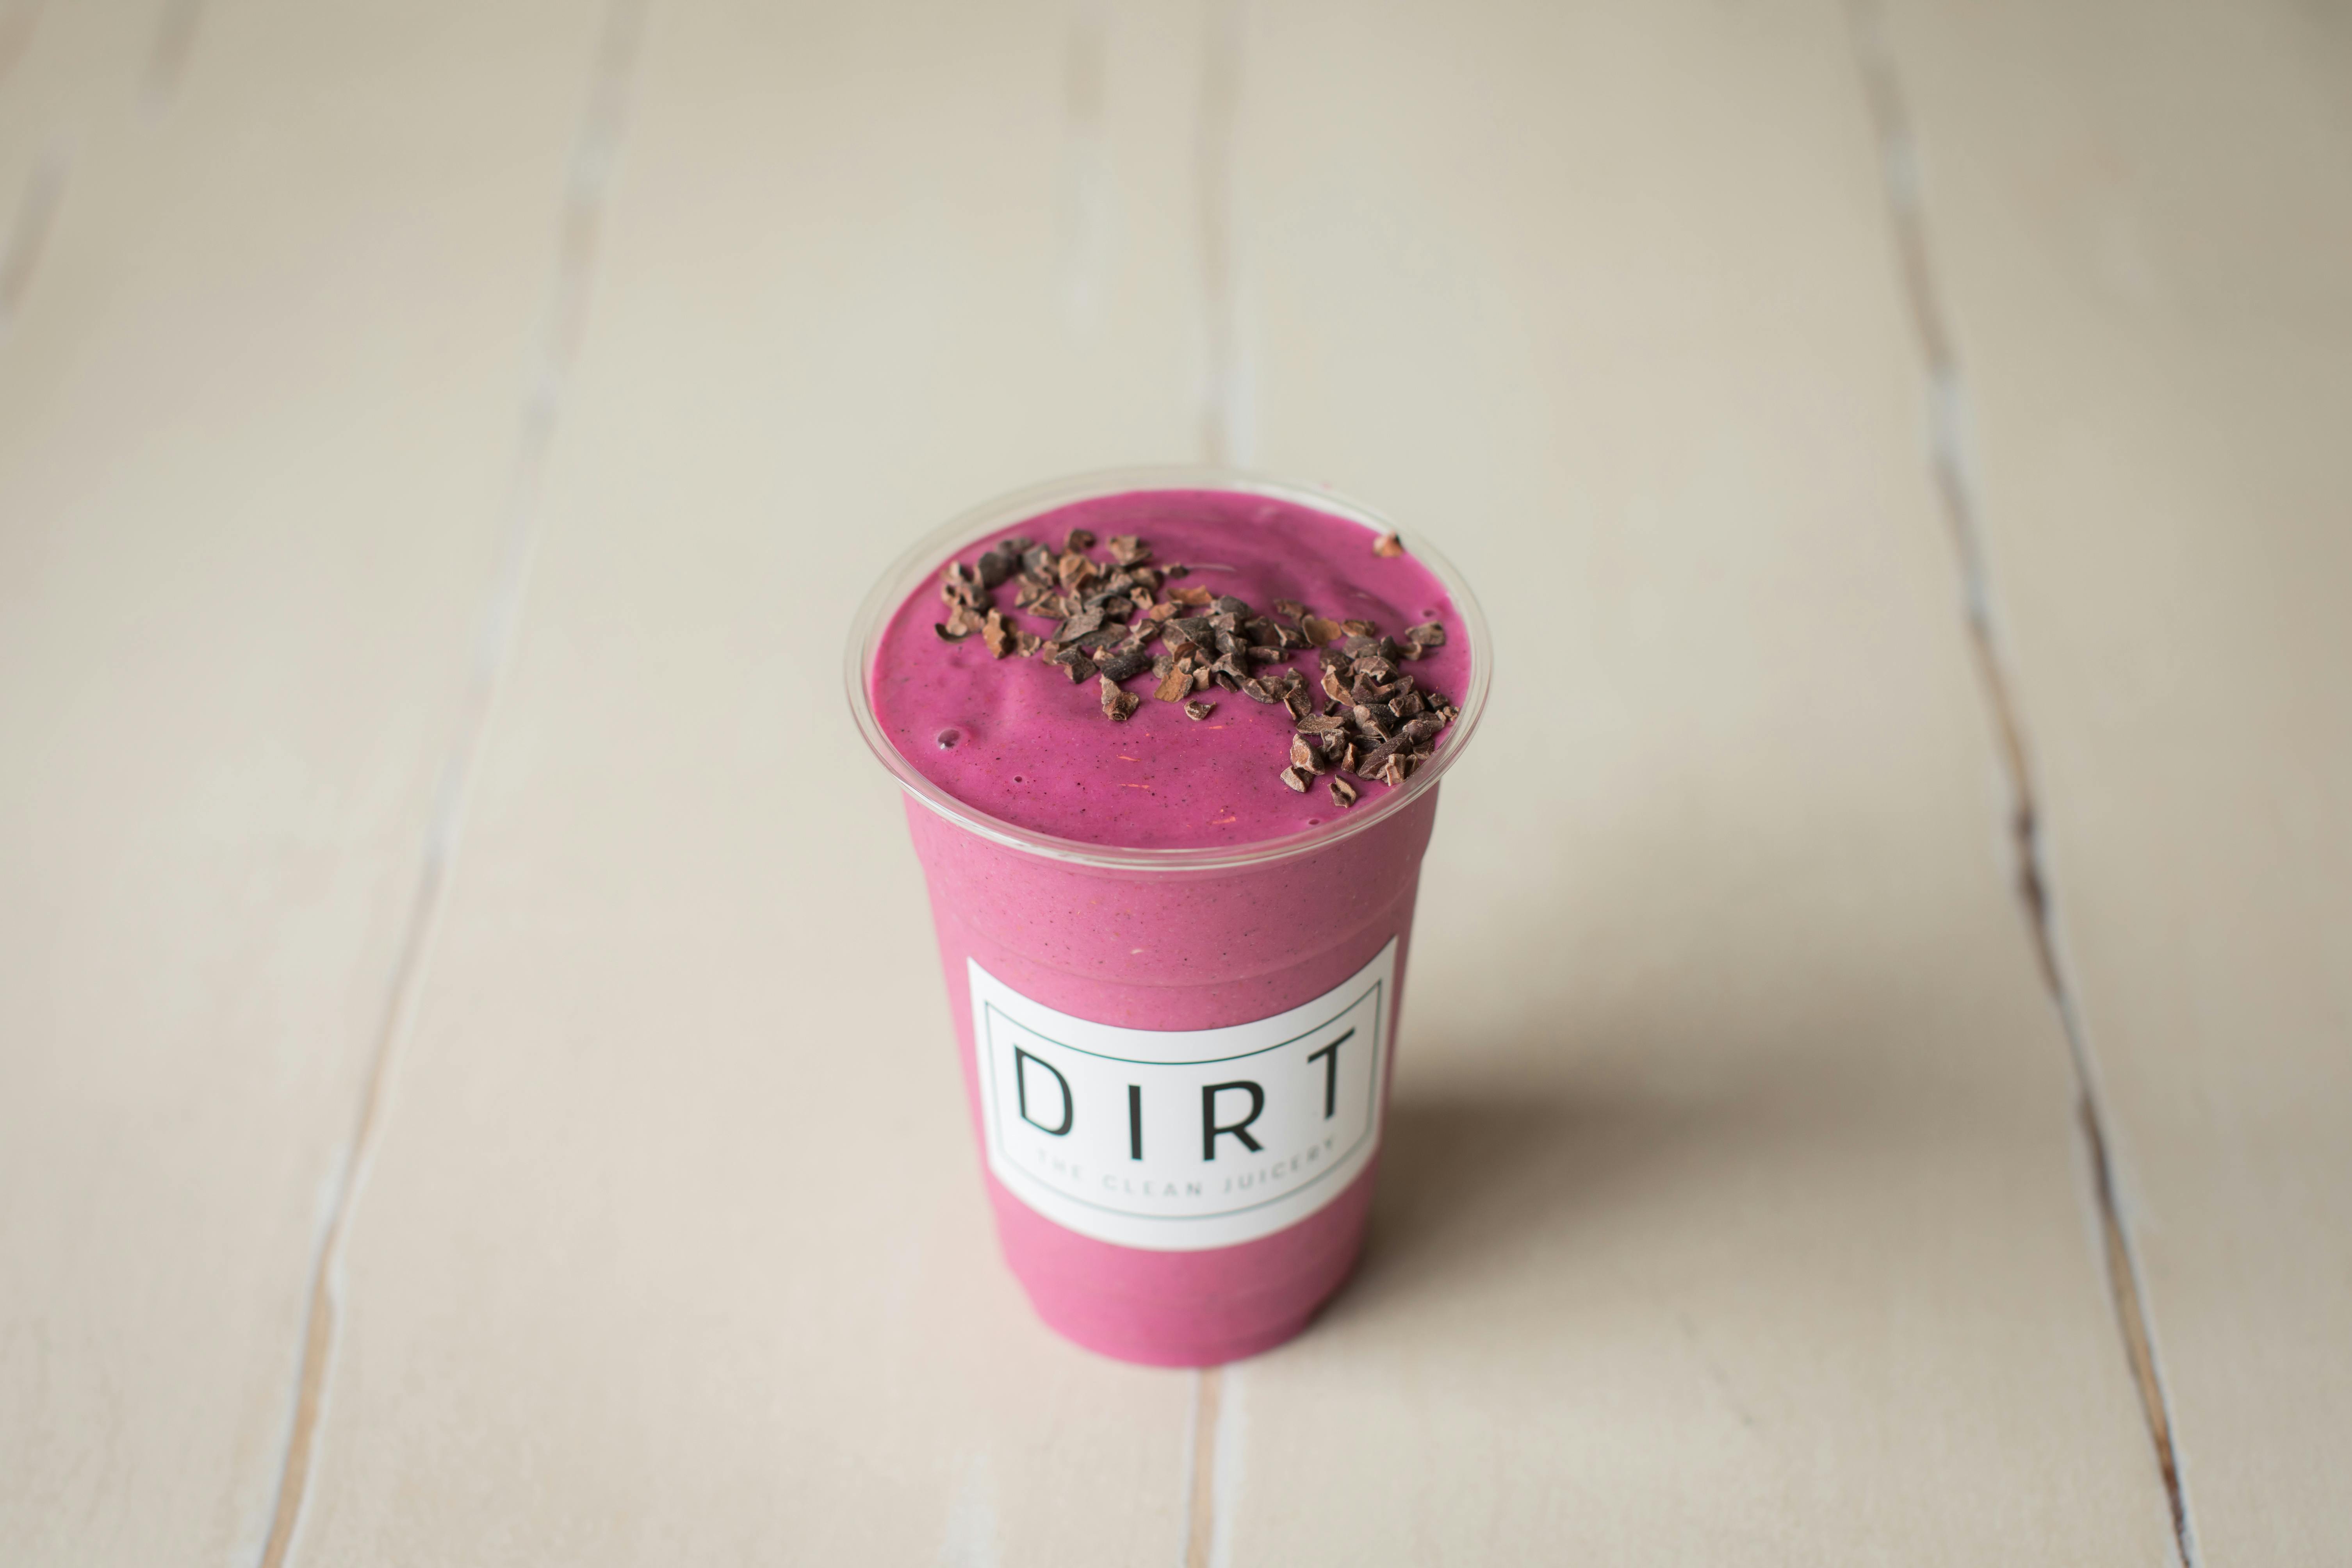 Pink Dragon from Dirt Juicery - Lineville Rd in Green Bay, WI